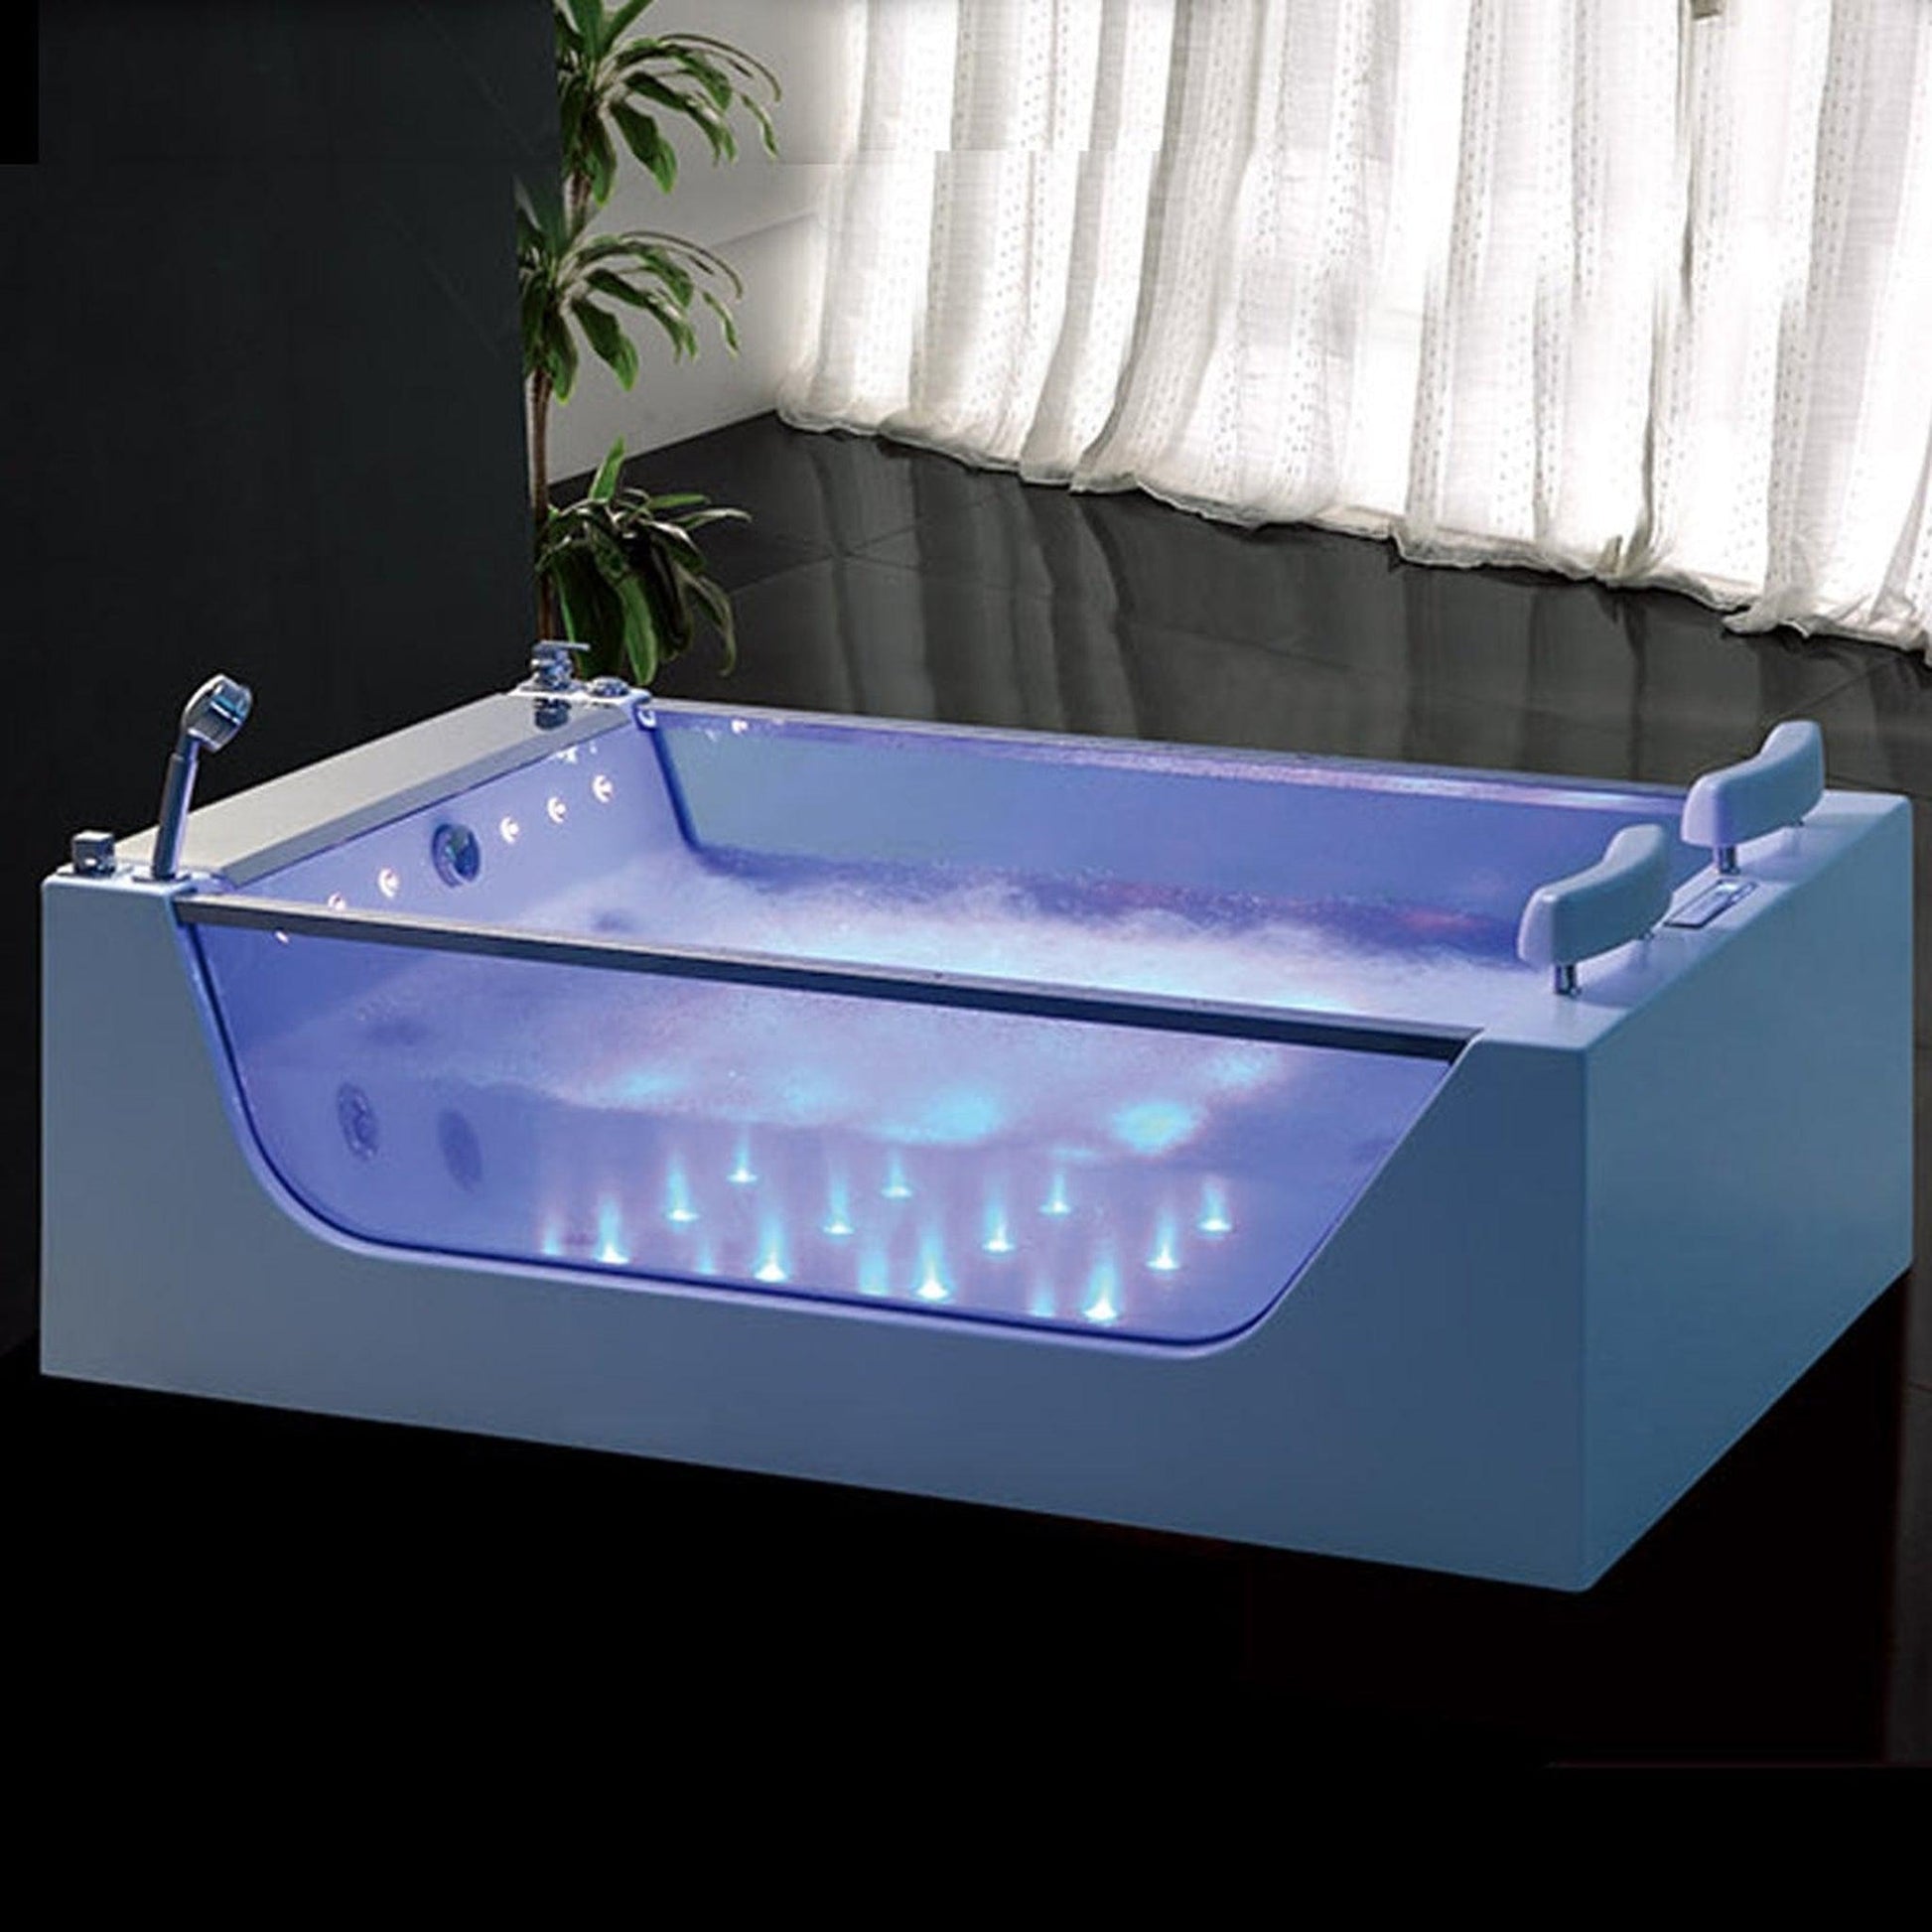 Fontana Sierra 71" x 47" 2-Person White Rectangular Freestanding Whirlpool Massage Indoor Acrylic Glass Bathtub With Bubbles LED Multicolor Light